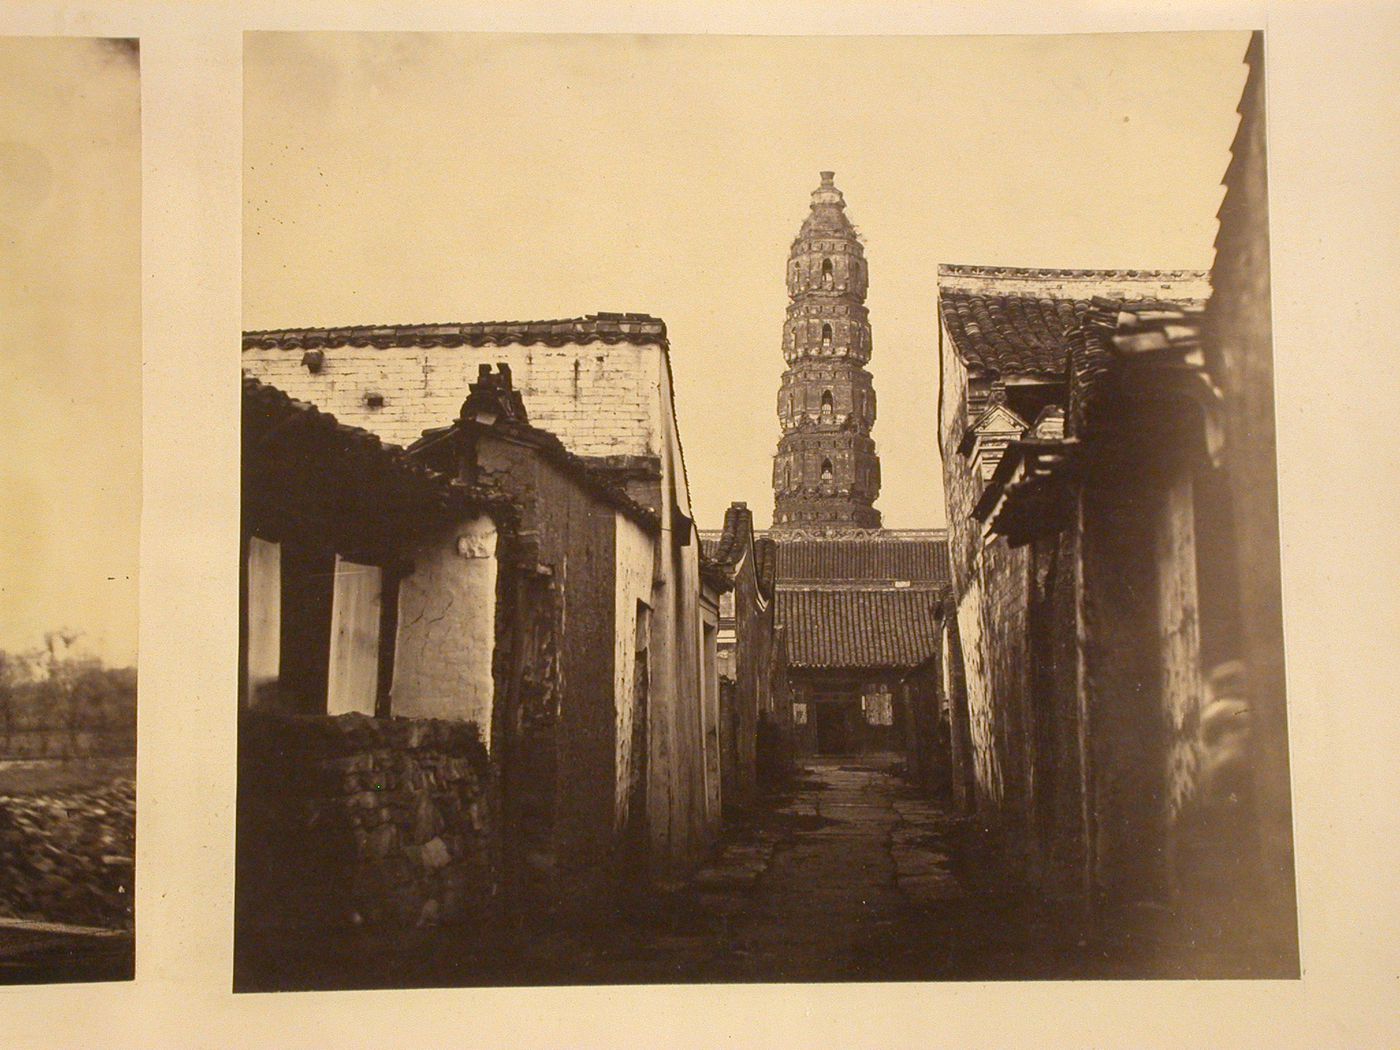 View of an alley and the upper part of the Heaven Conferred Pagoda [Tianfeng Ta], in the background, Ningpo (now Ningbo Shi), Cheh-kiang Province (now Zhejiang Sheng), China